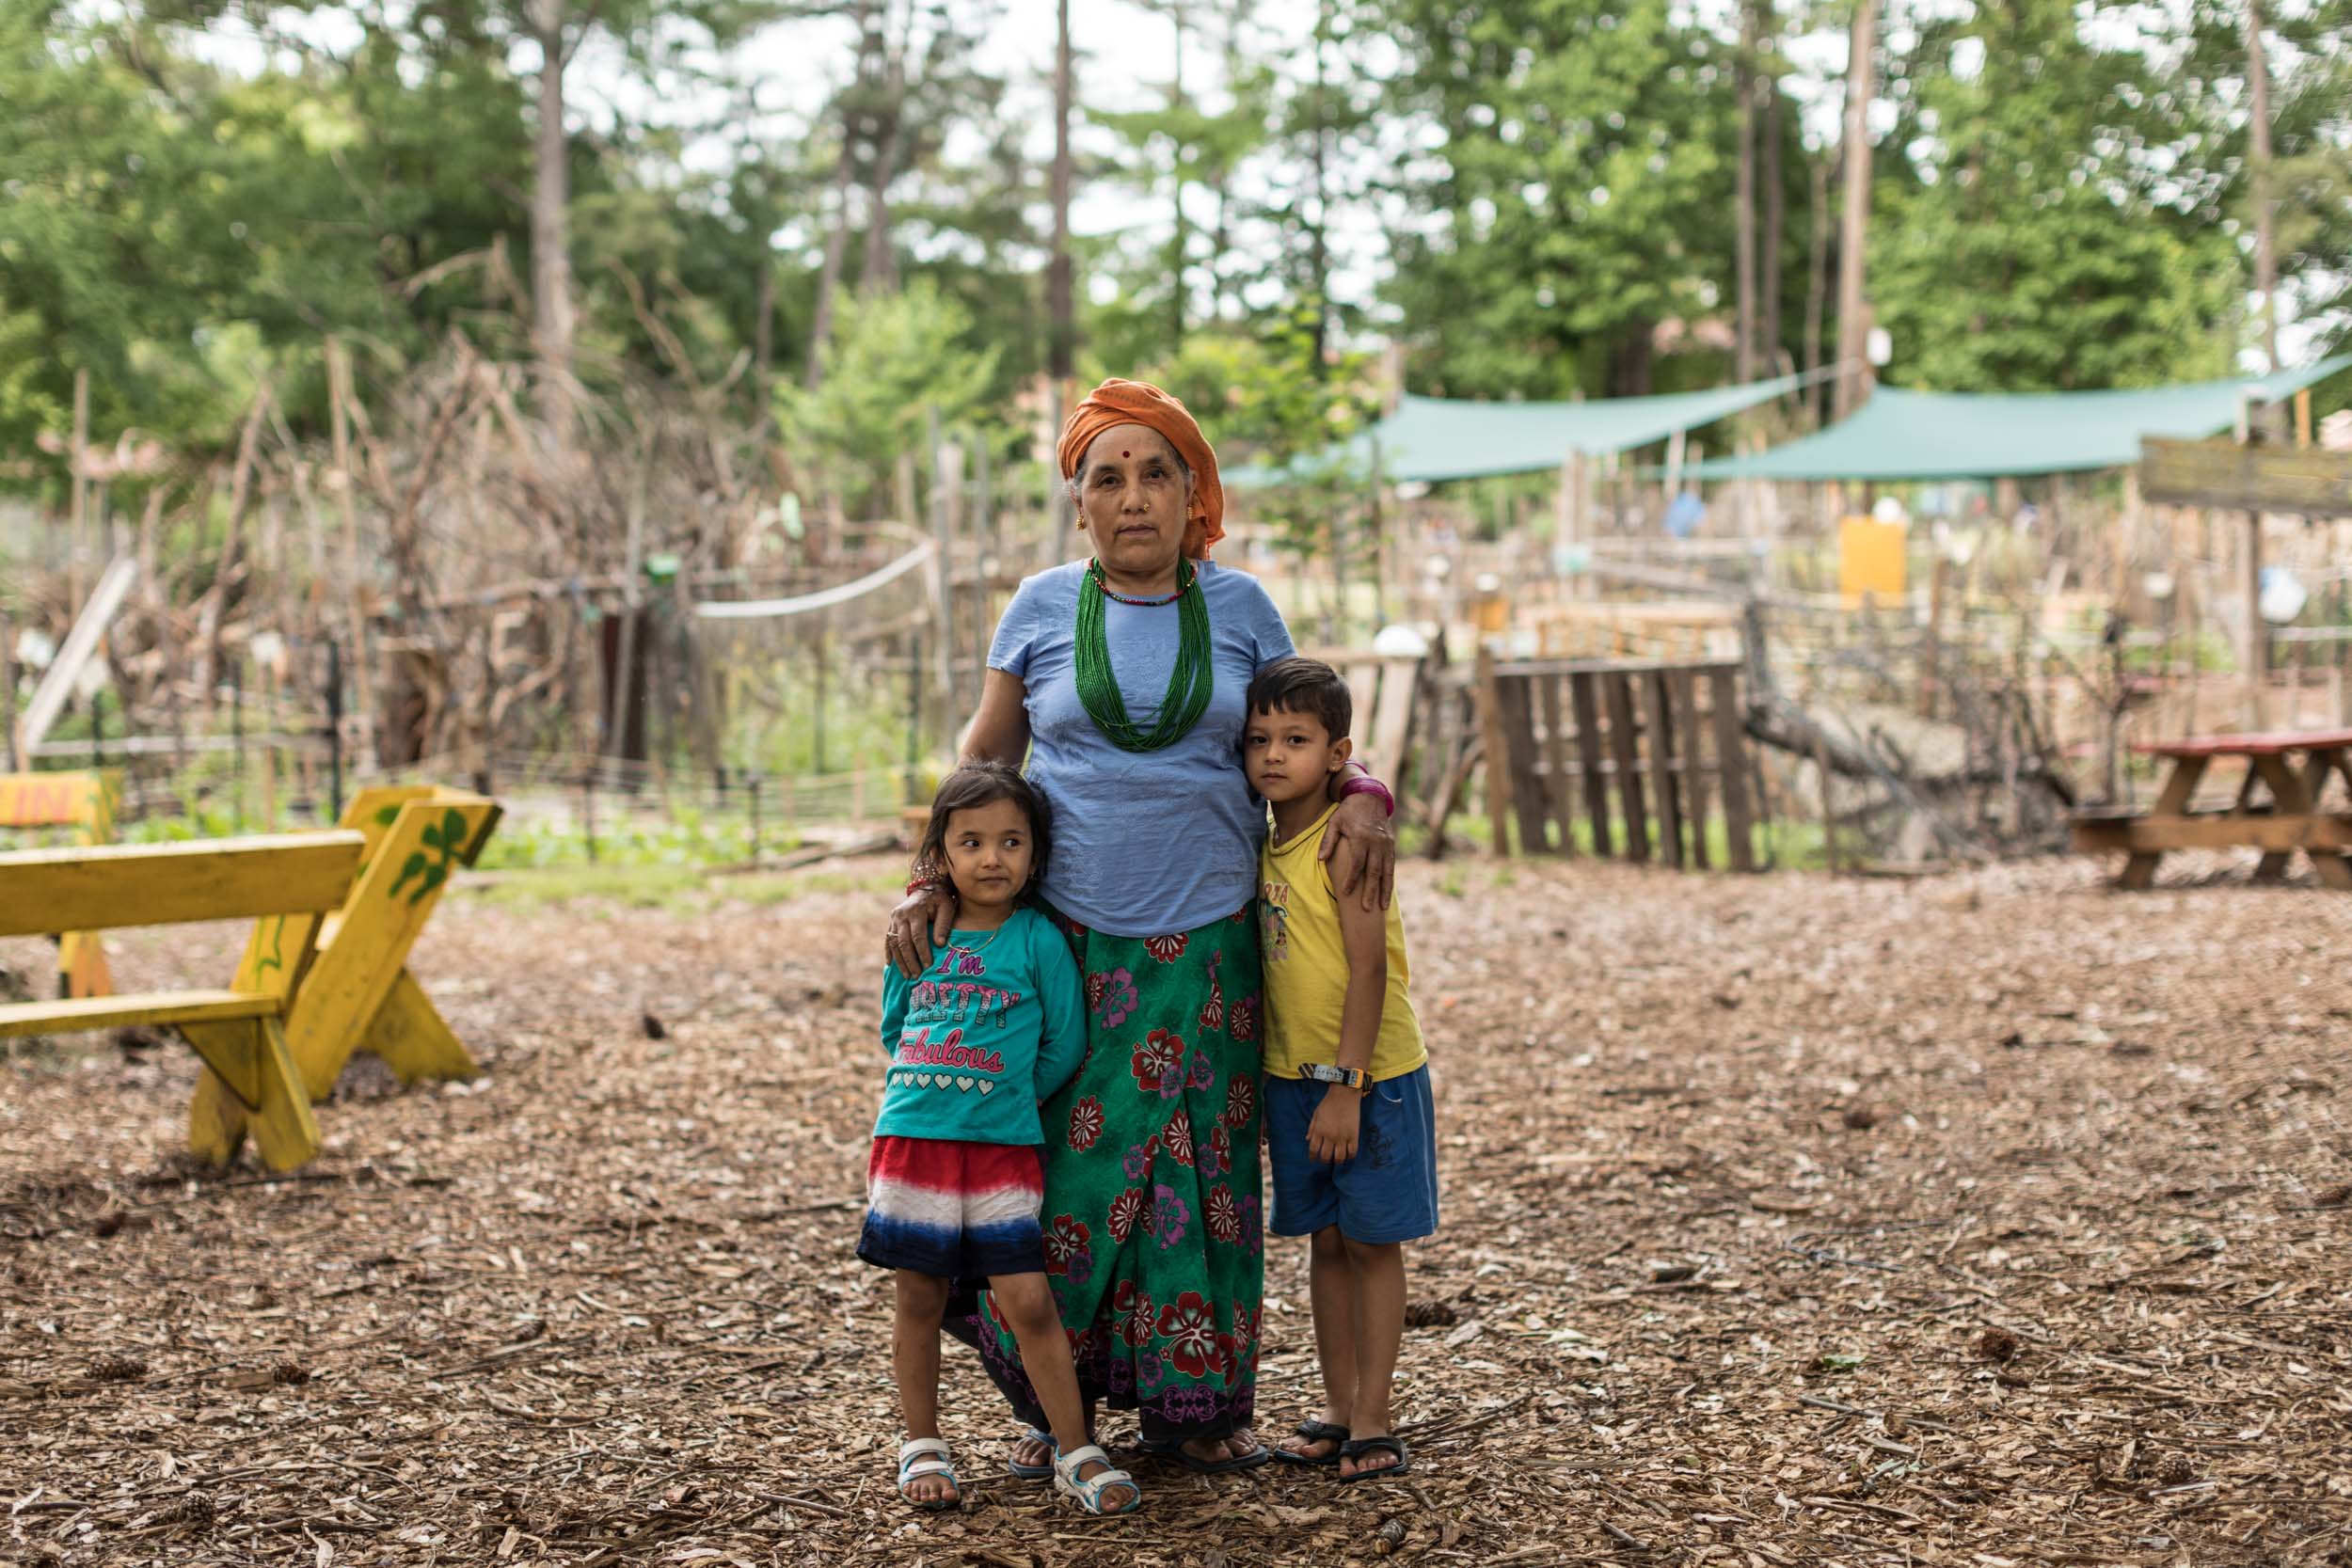  Nepalize refugee woman and her children inside the Friends of Refugees community garden in Clarkston, Georgia.  Shot for The Guardian, (May 2017)   This small town in America's Deep South welcomes 1,500 refugees a year   